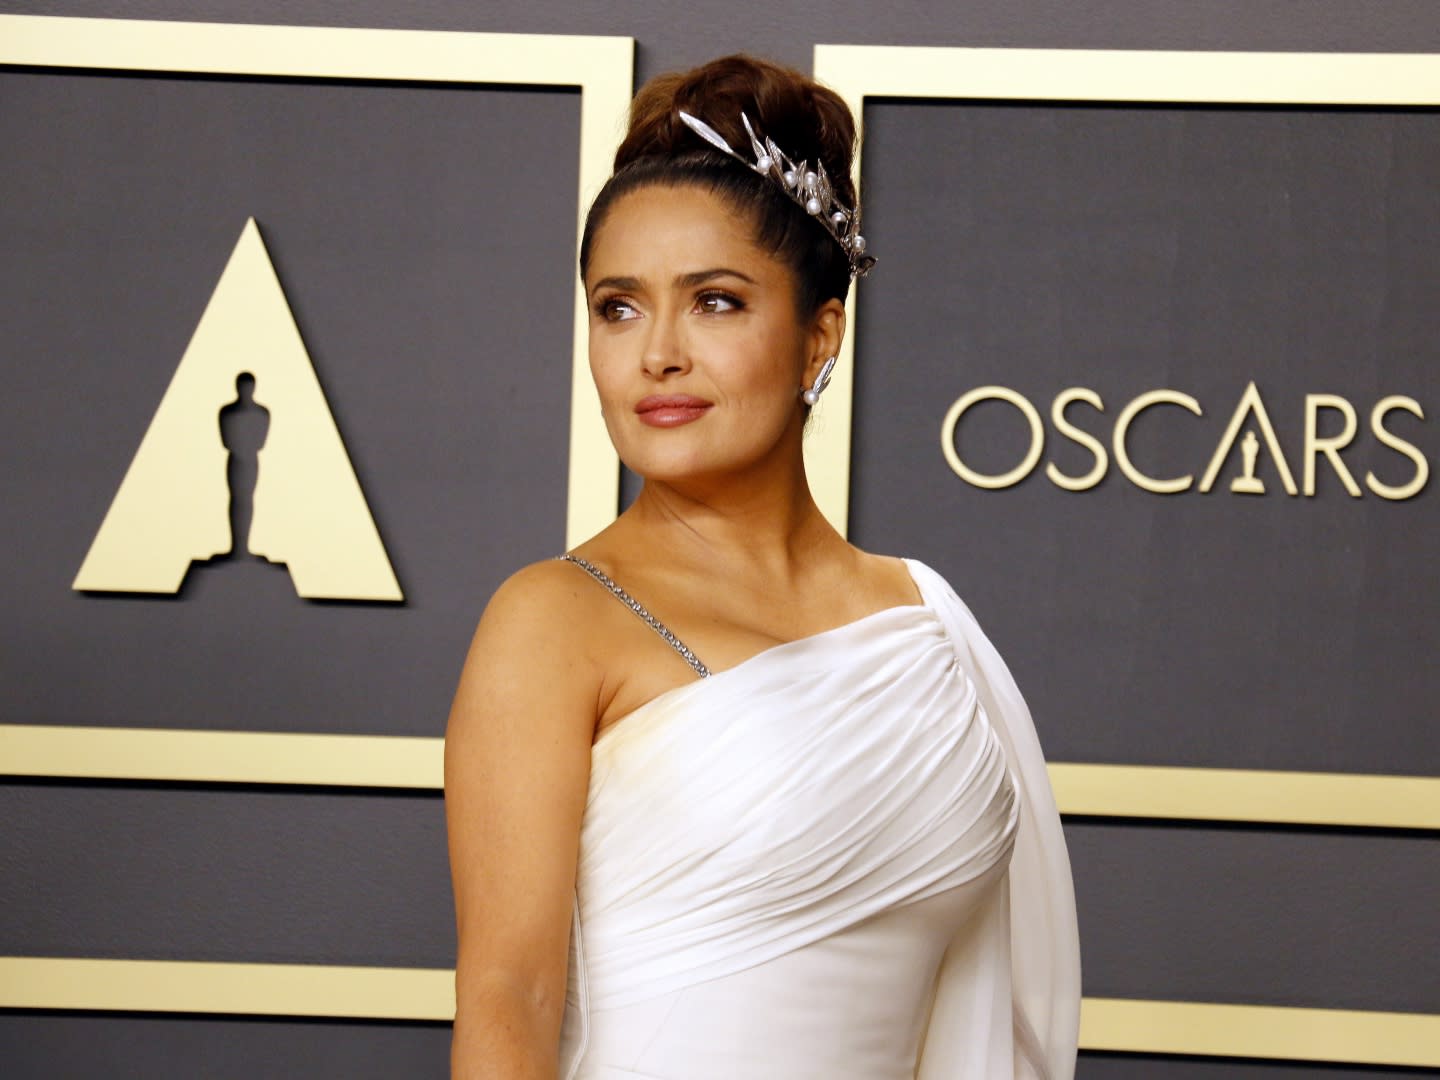 Photos of Salma Hayek’s dreams in the water come with a cheeky surprise